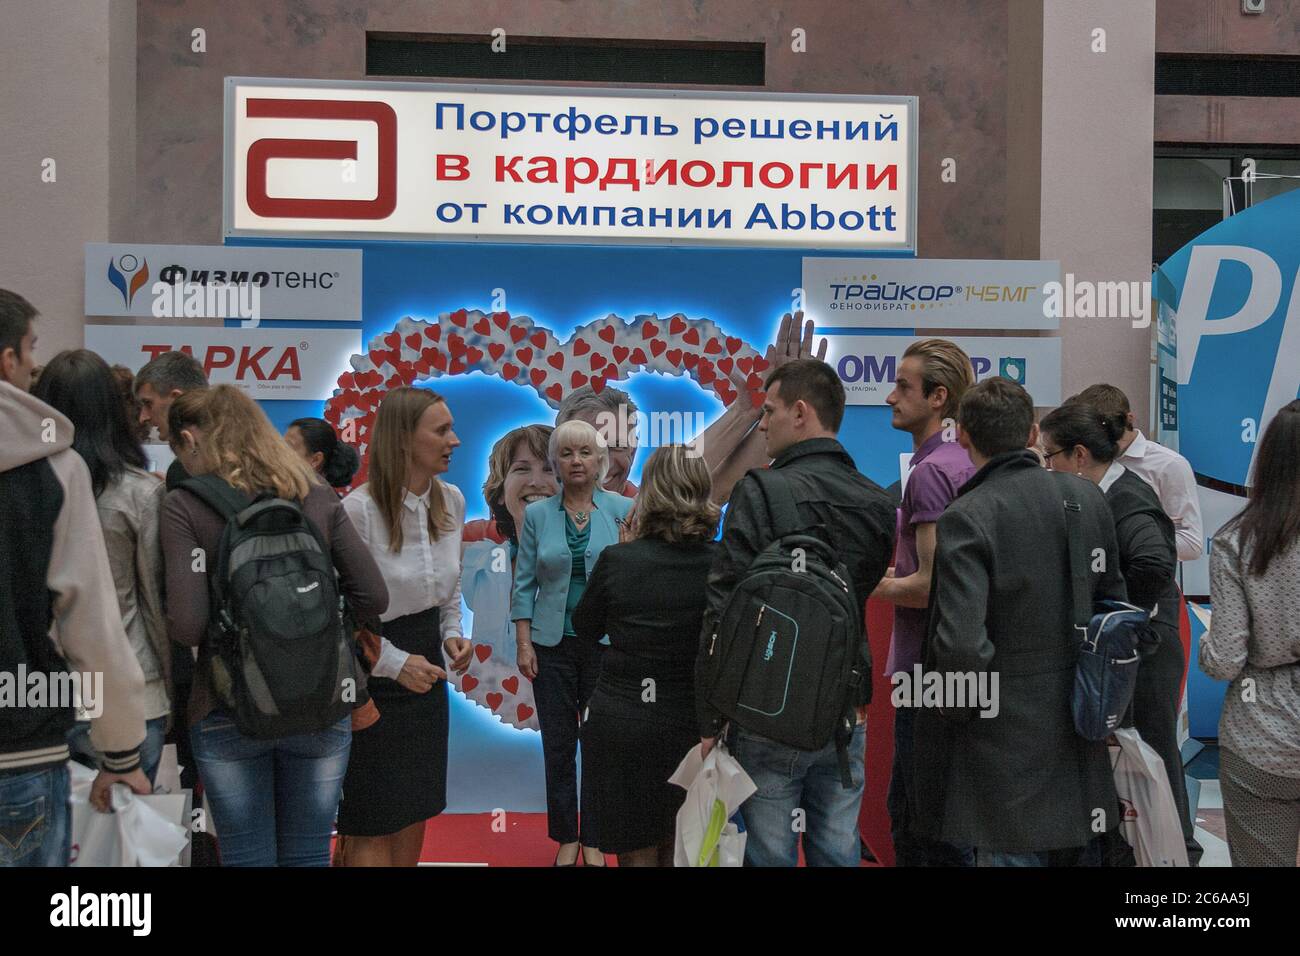 KYIV, UKRAINE - SEPTEMBER 23, 2014: People visit Abbott American pharmaceutical company booth at XV National Congress of Cardiologists in Olimpiyskiy Stock Photo